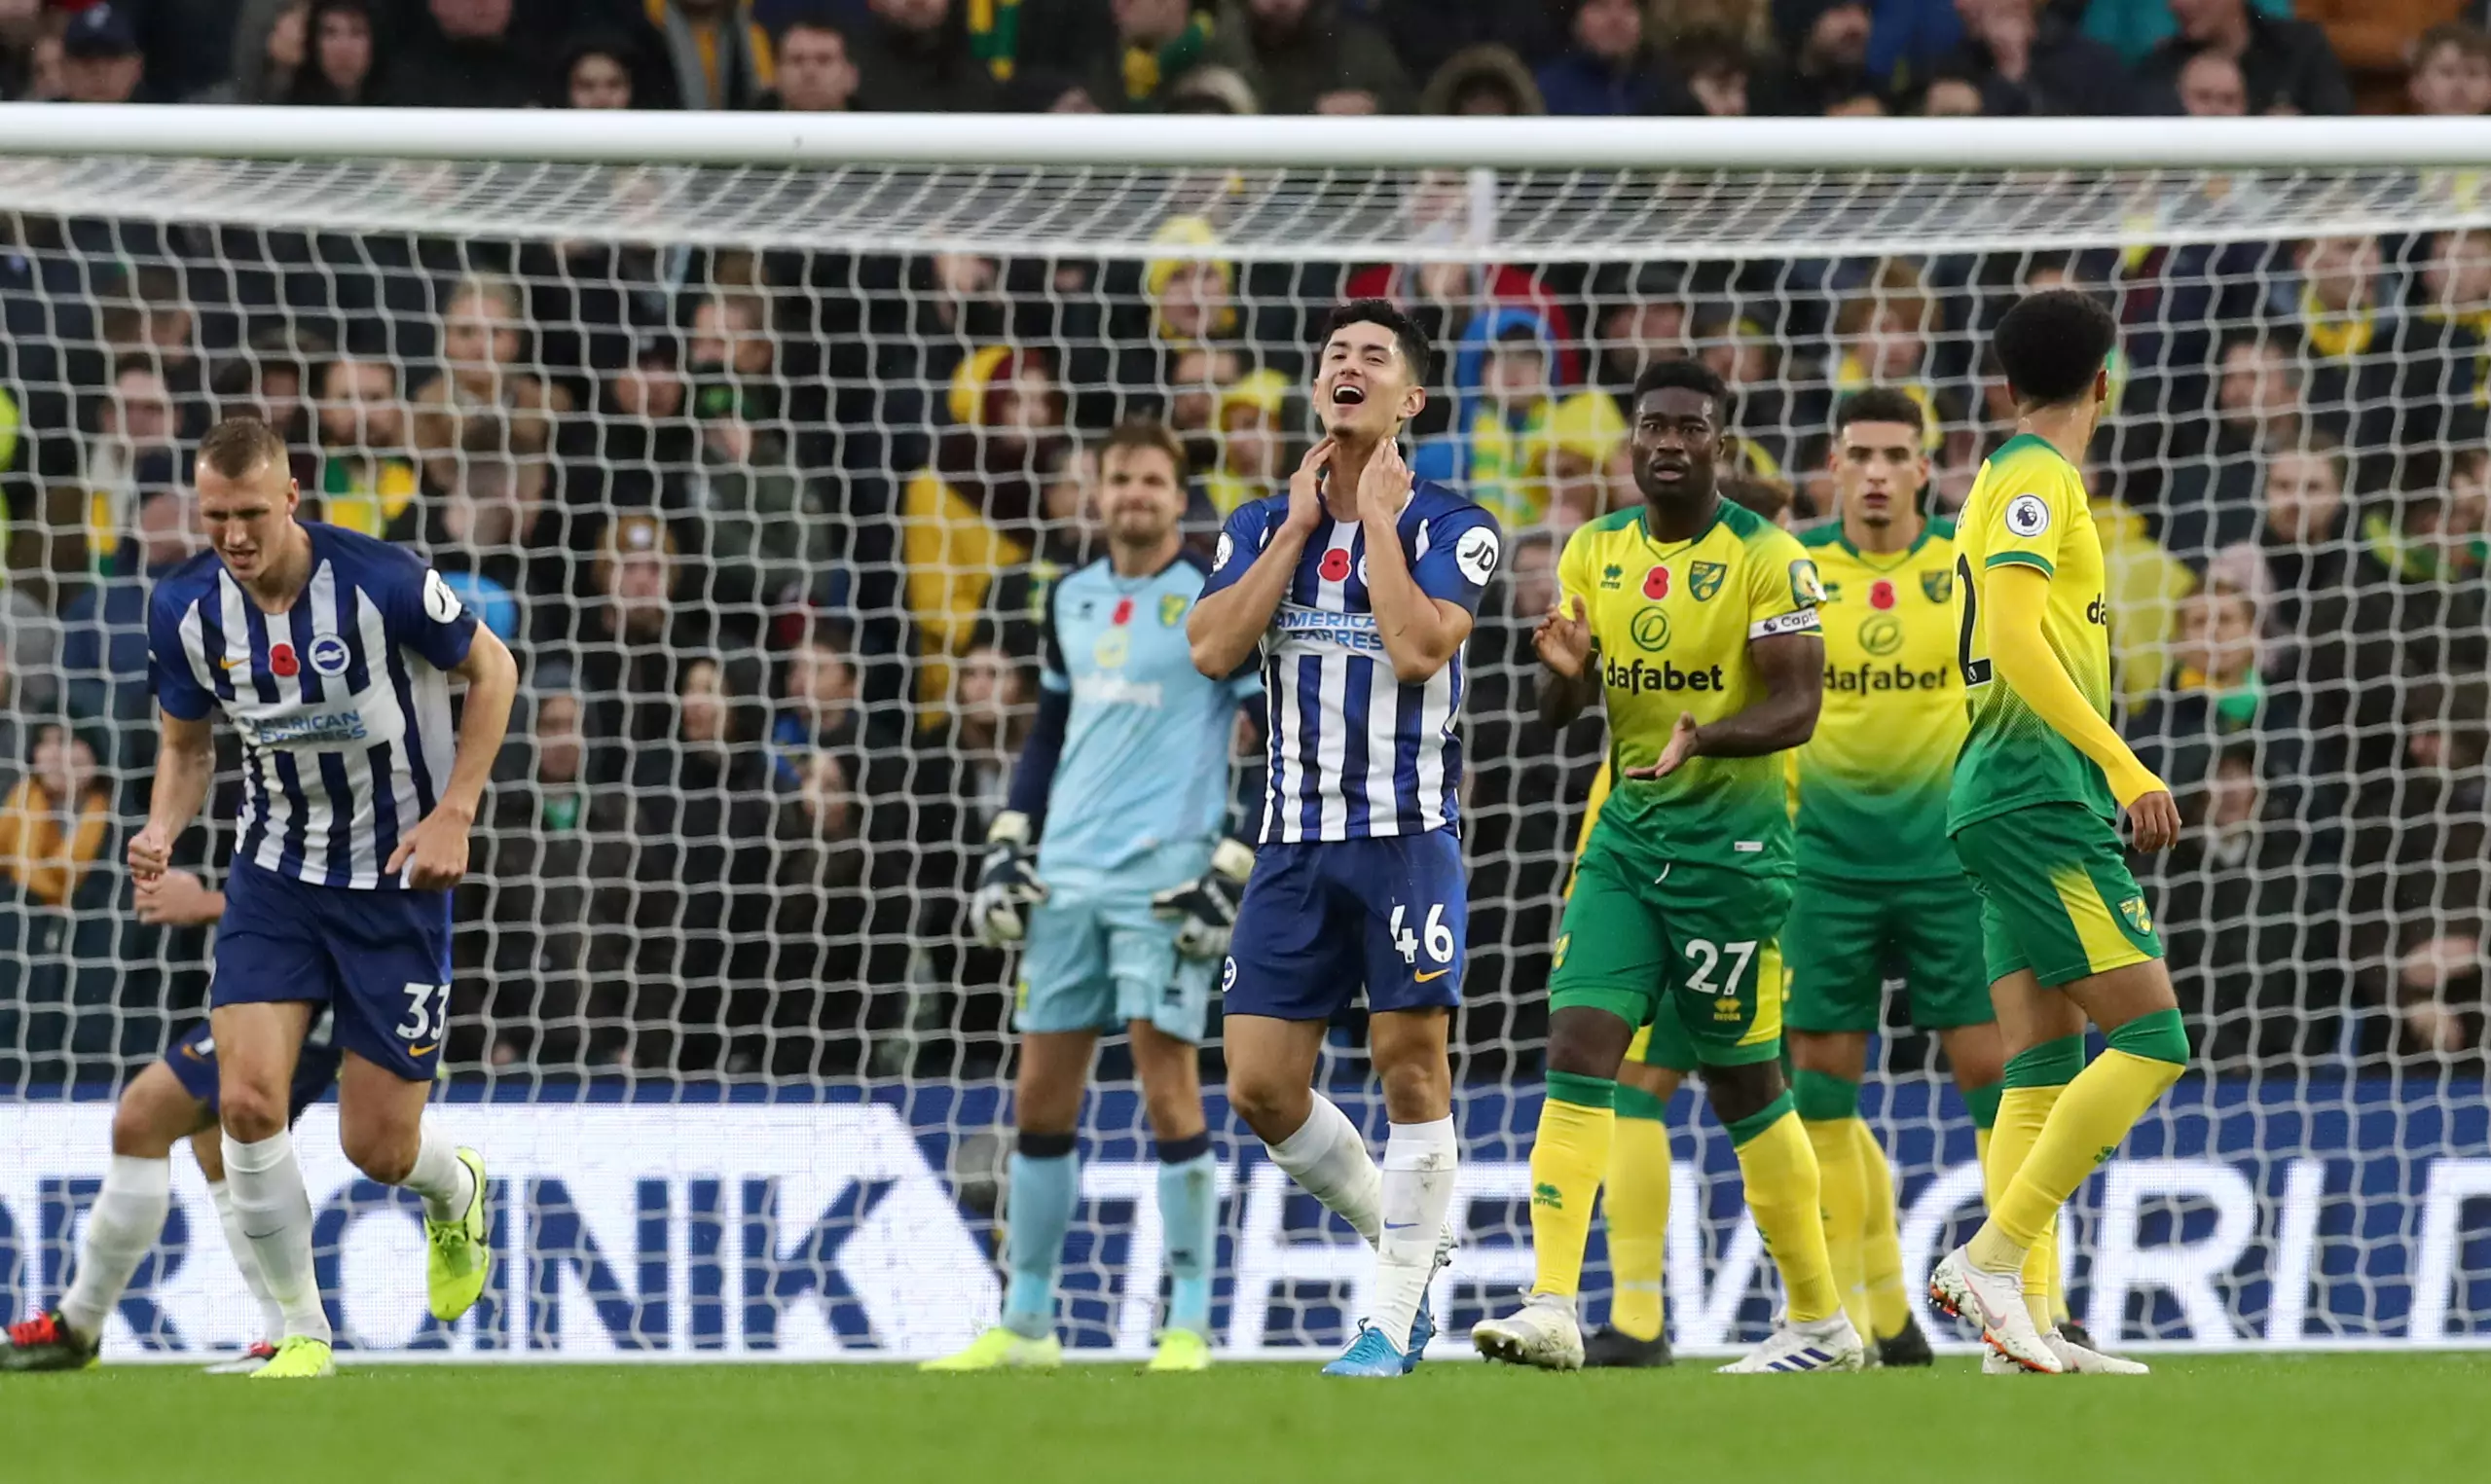 Brighton and Norwich are amongst the teams the split in thinking could effect. Image: PA Images